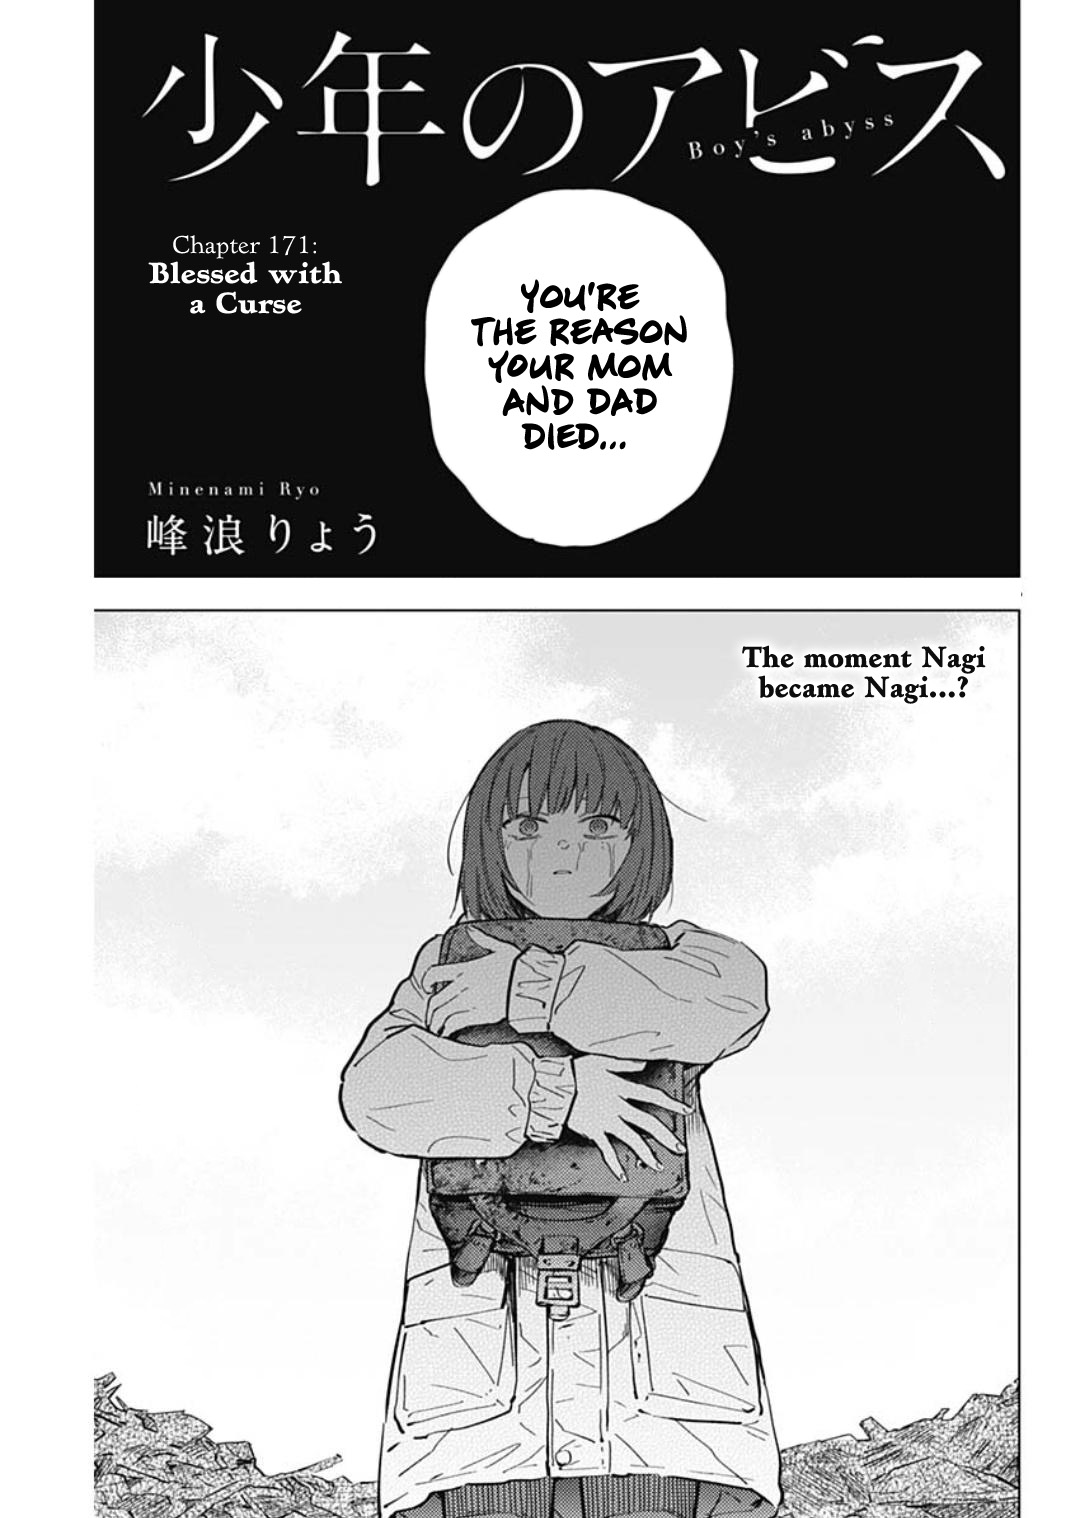 Boy’s Abyss, chapter 171